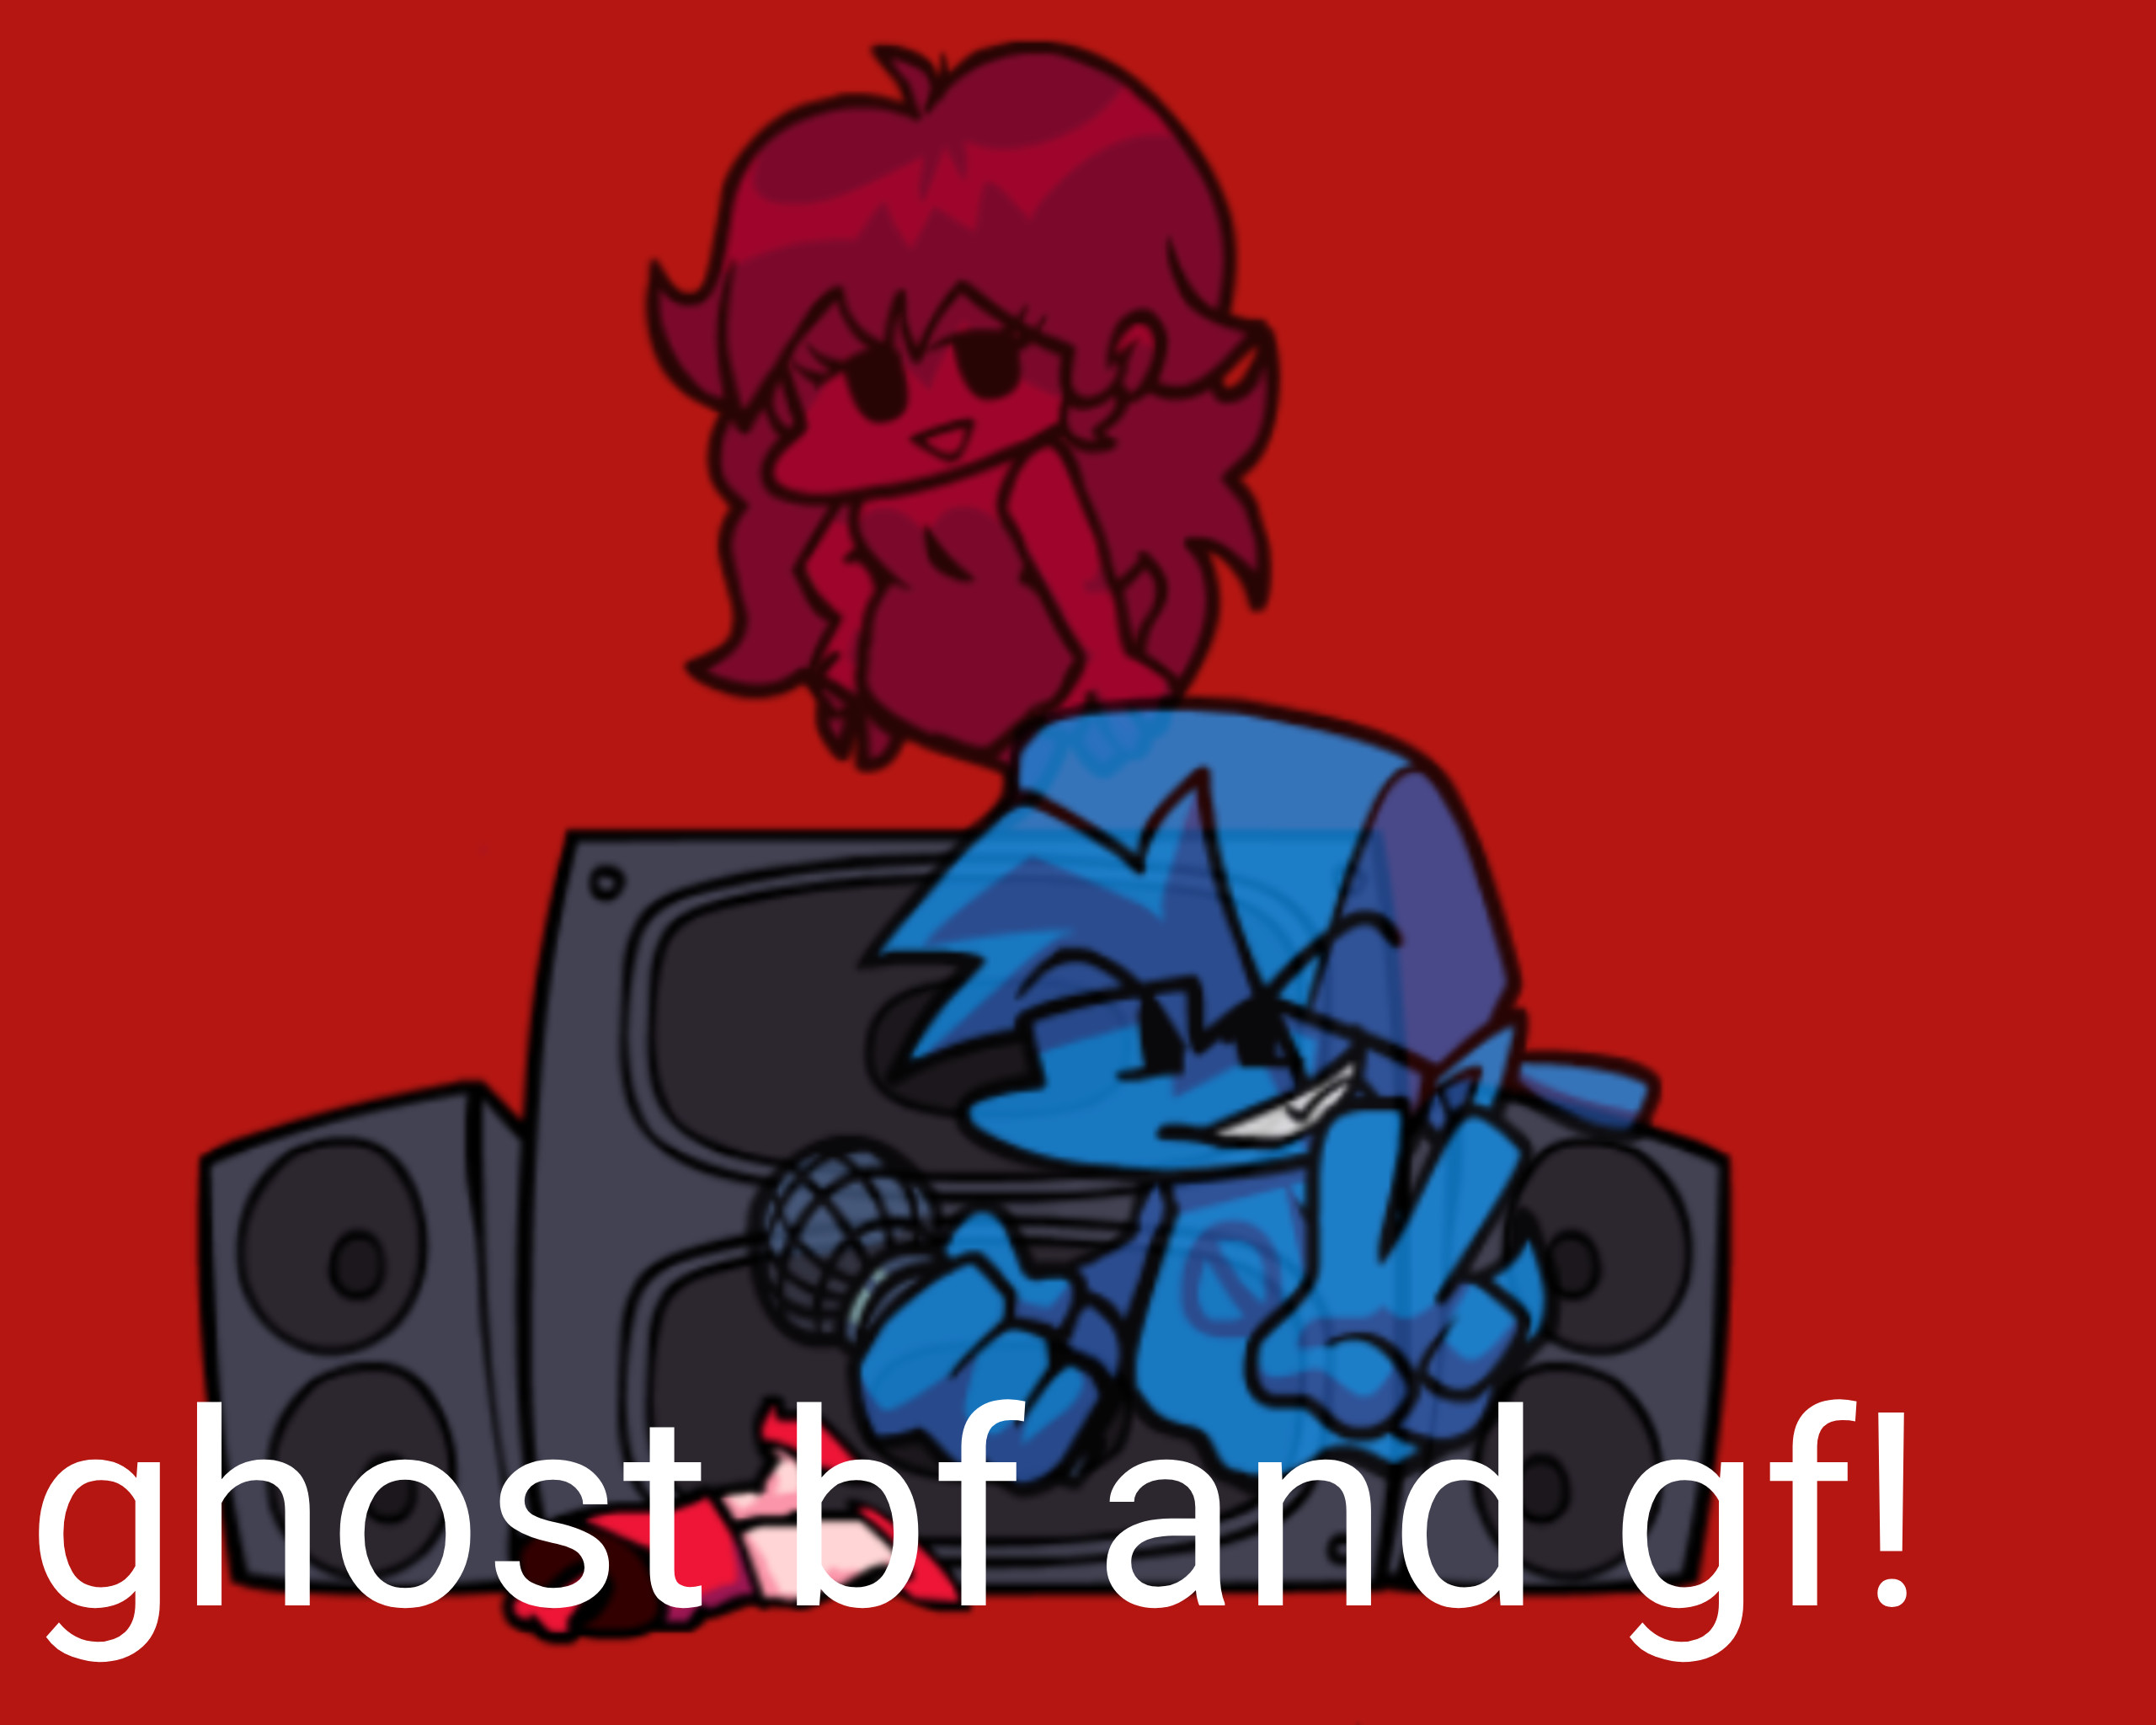 Ghost bf and gf [Friday Night Funkin'] [Mods]